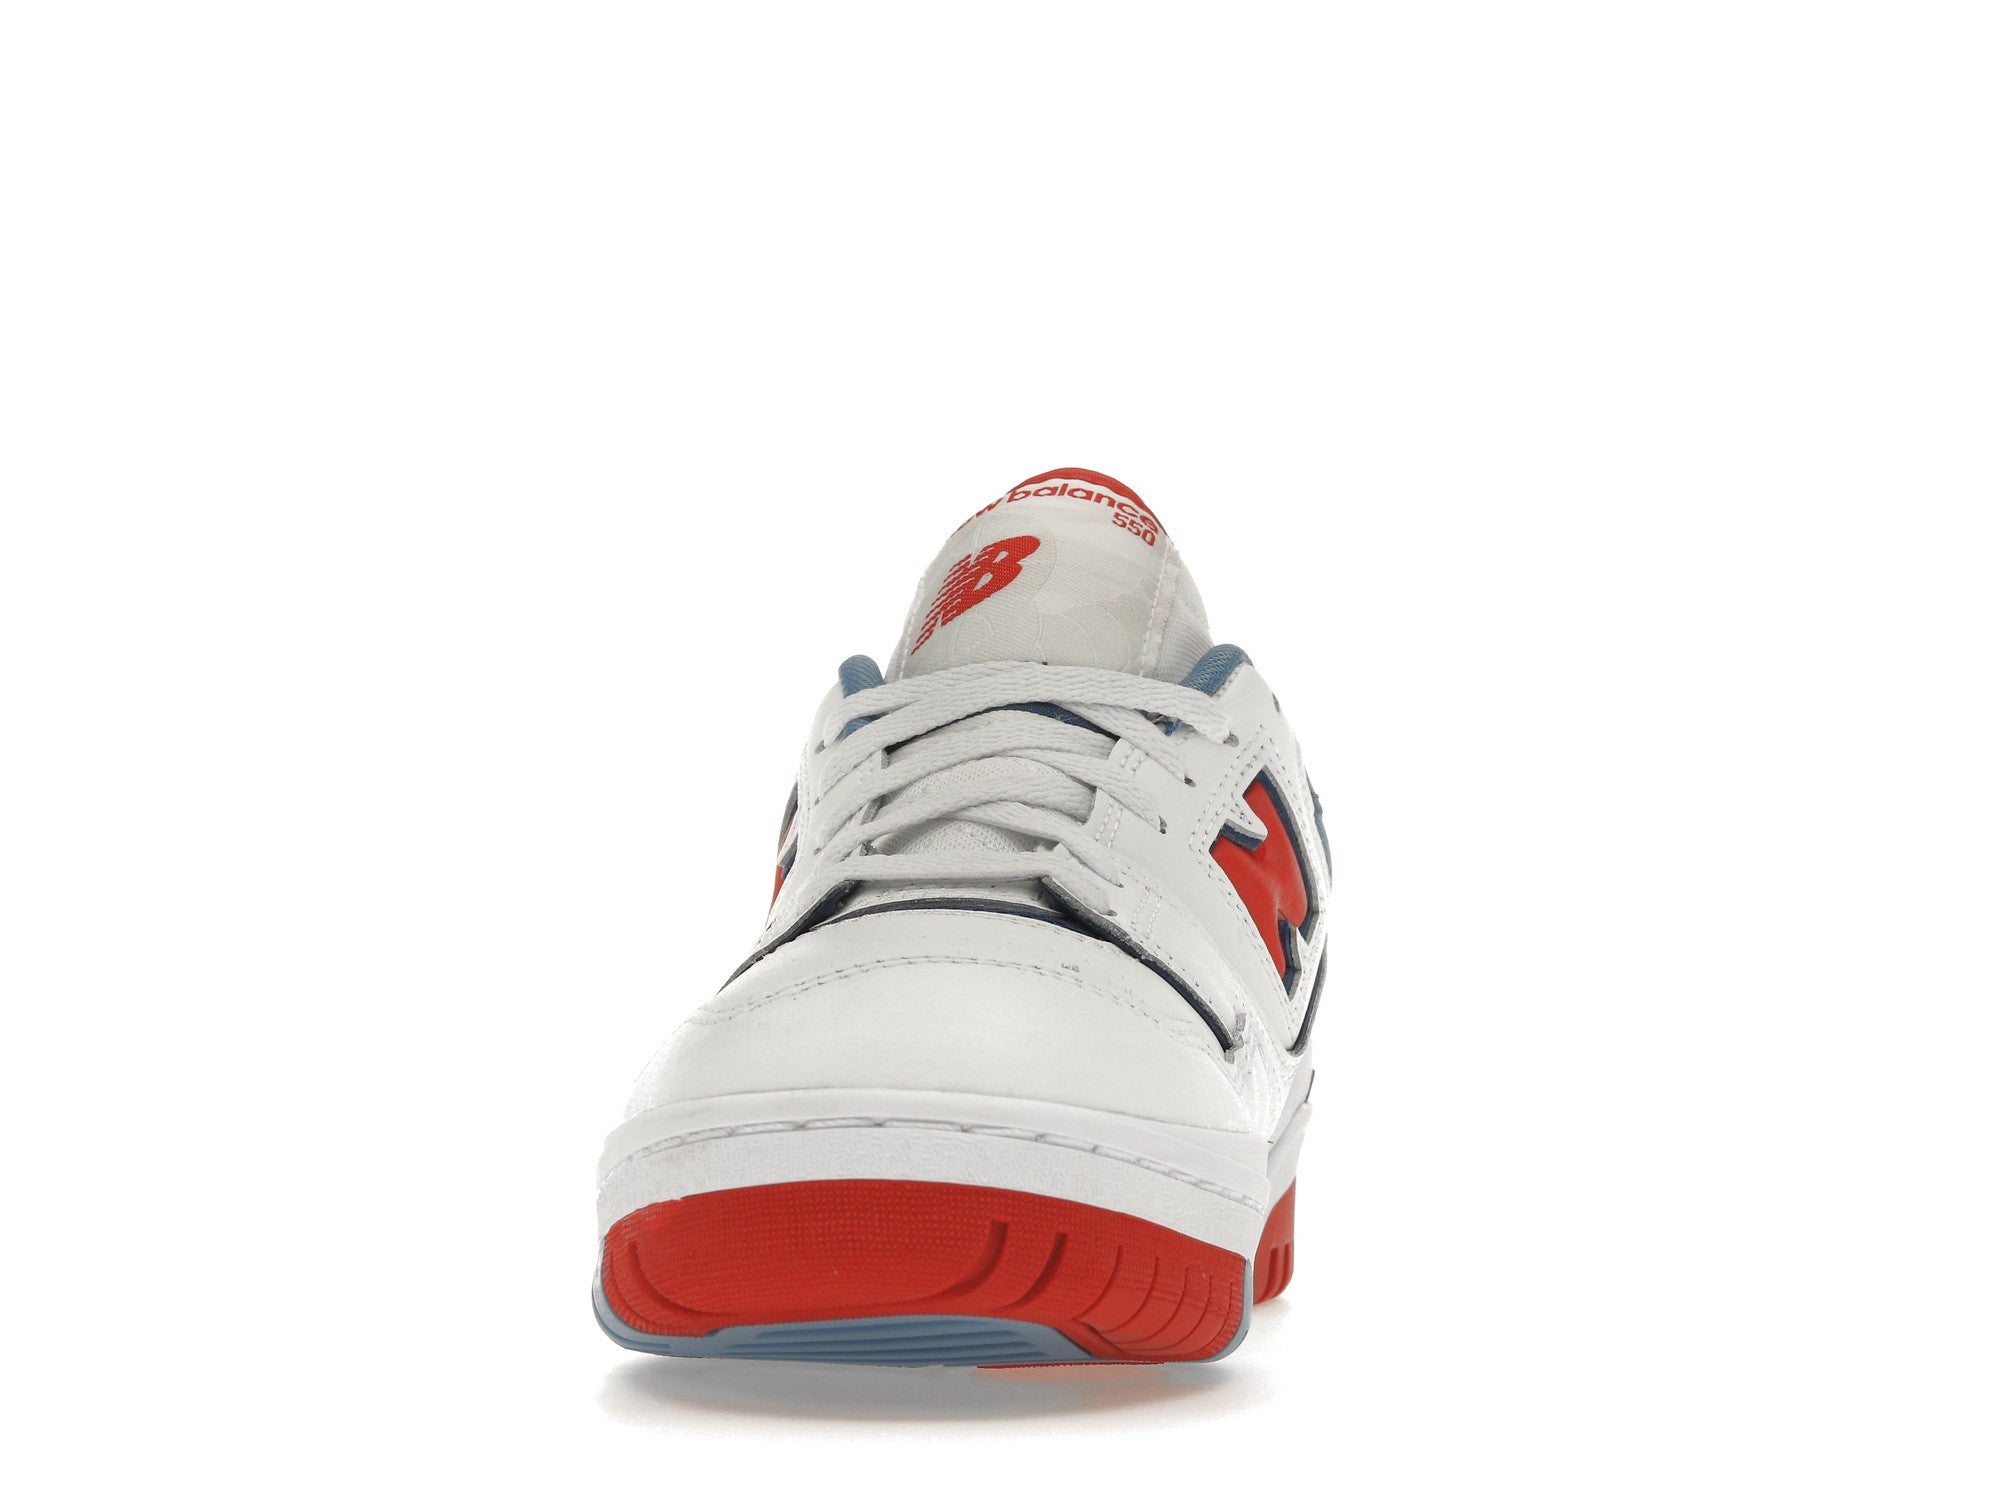 New Balance 550 White True Red Atlantic Blue BB550NCH -  MultiscaleconsultingShops